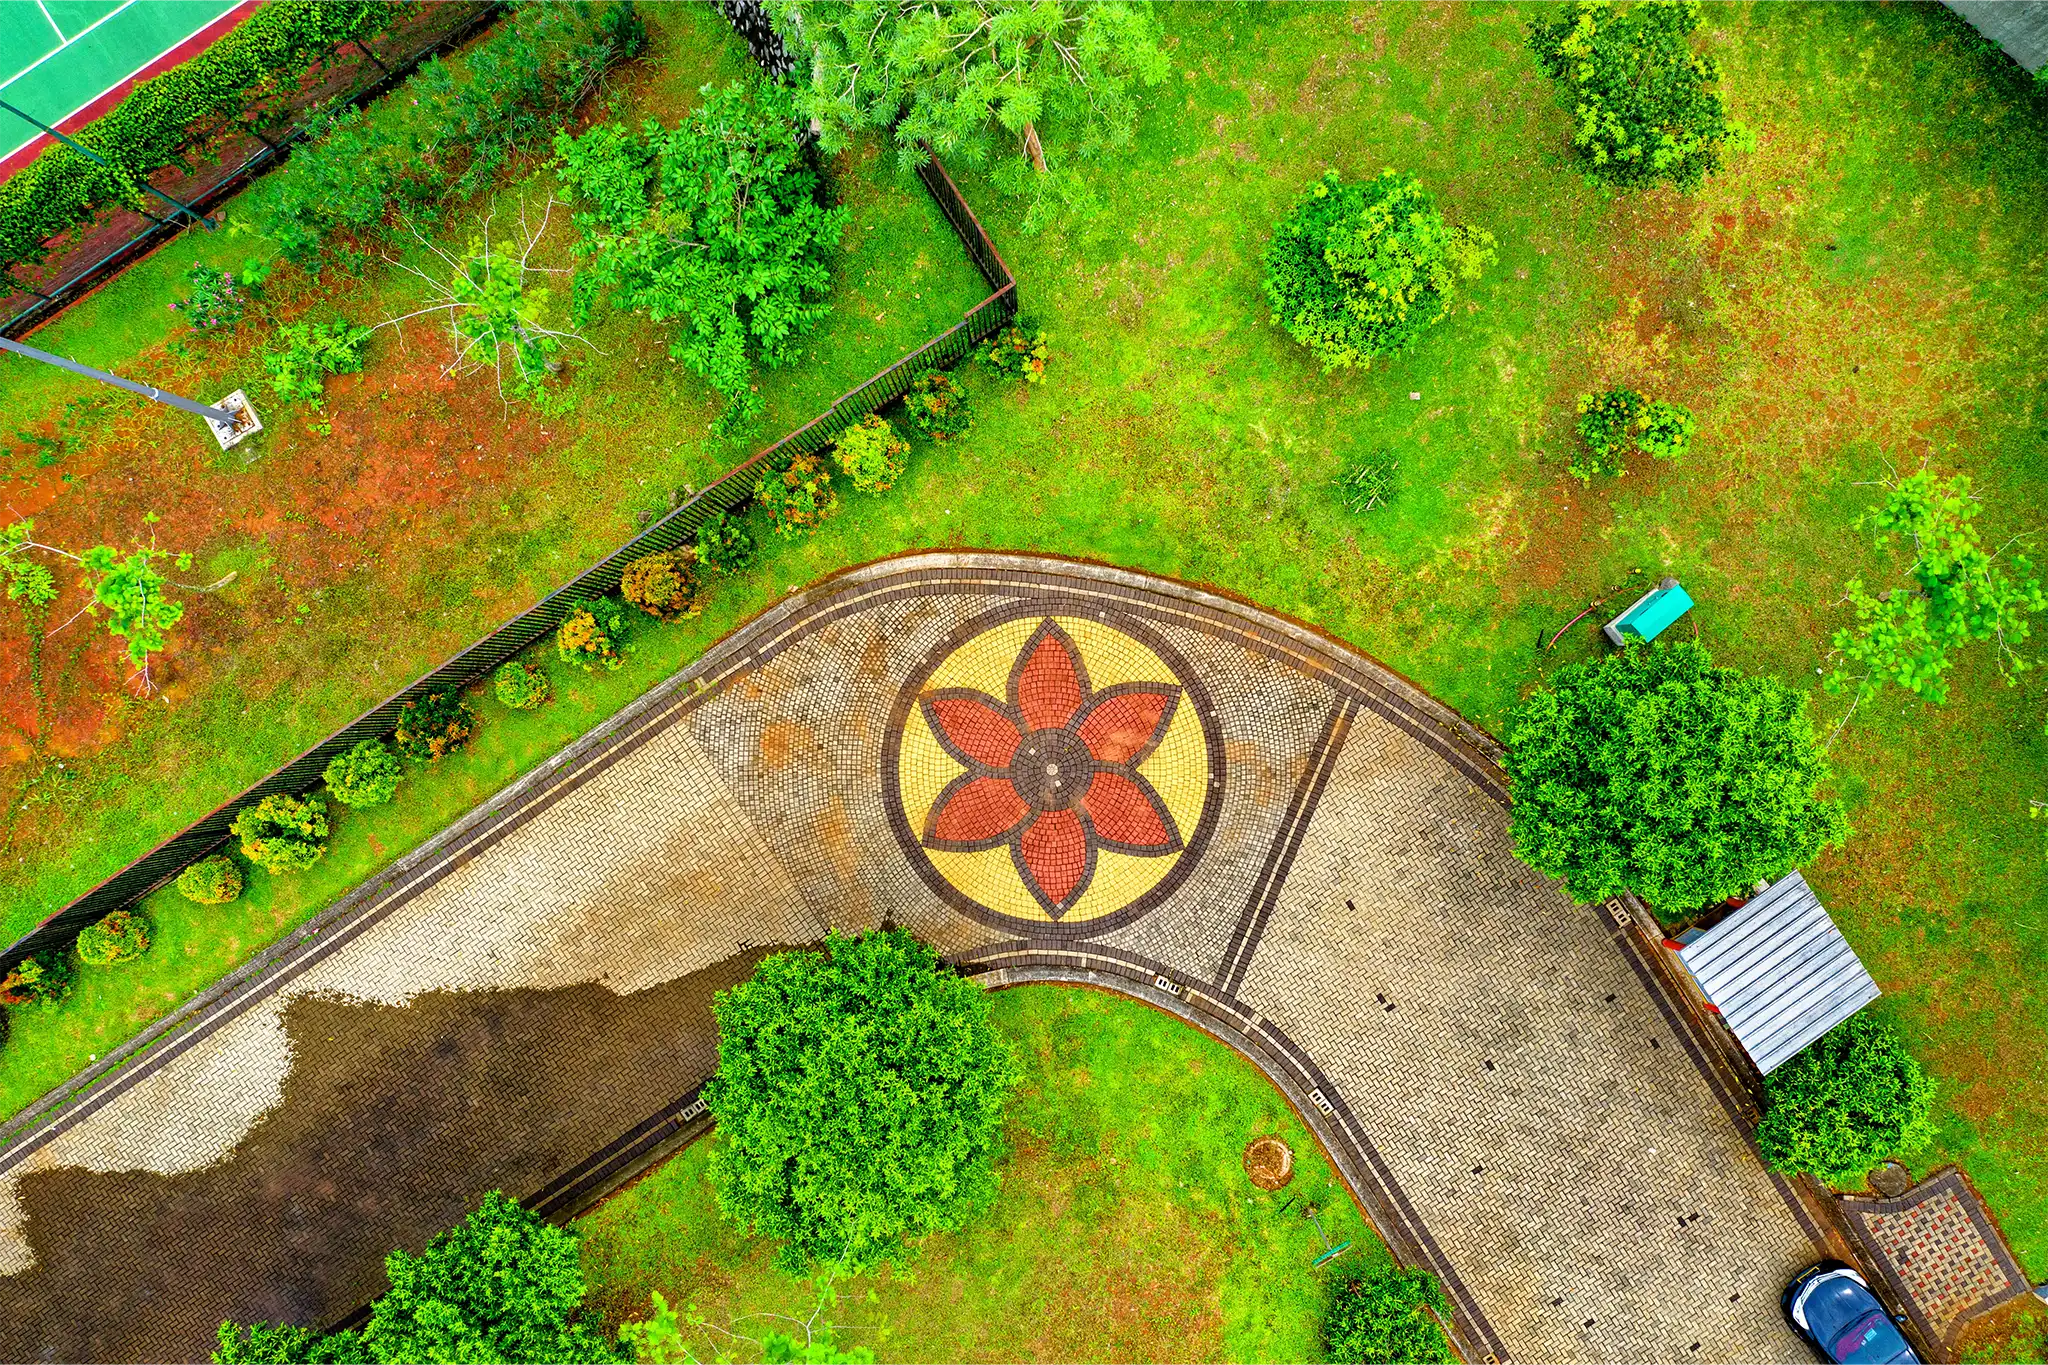 An overhead view of a backyard with a floral walkway